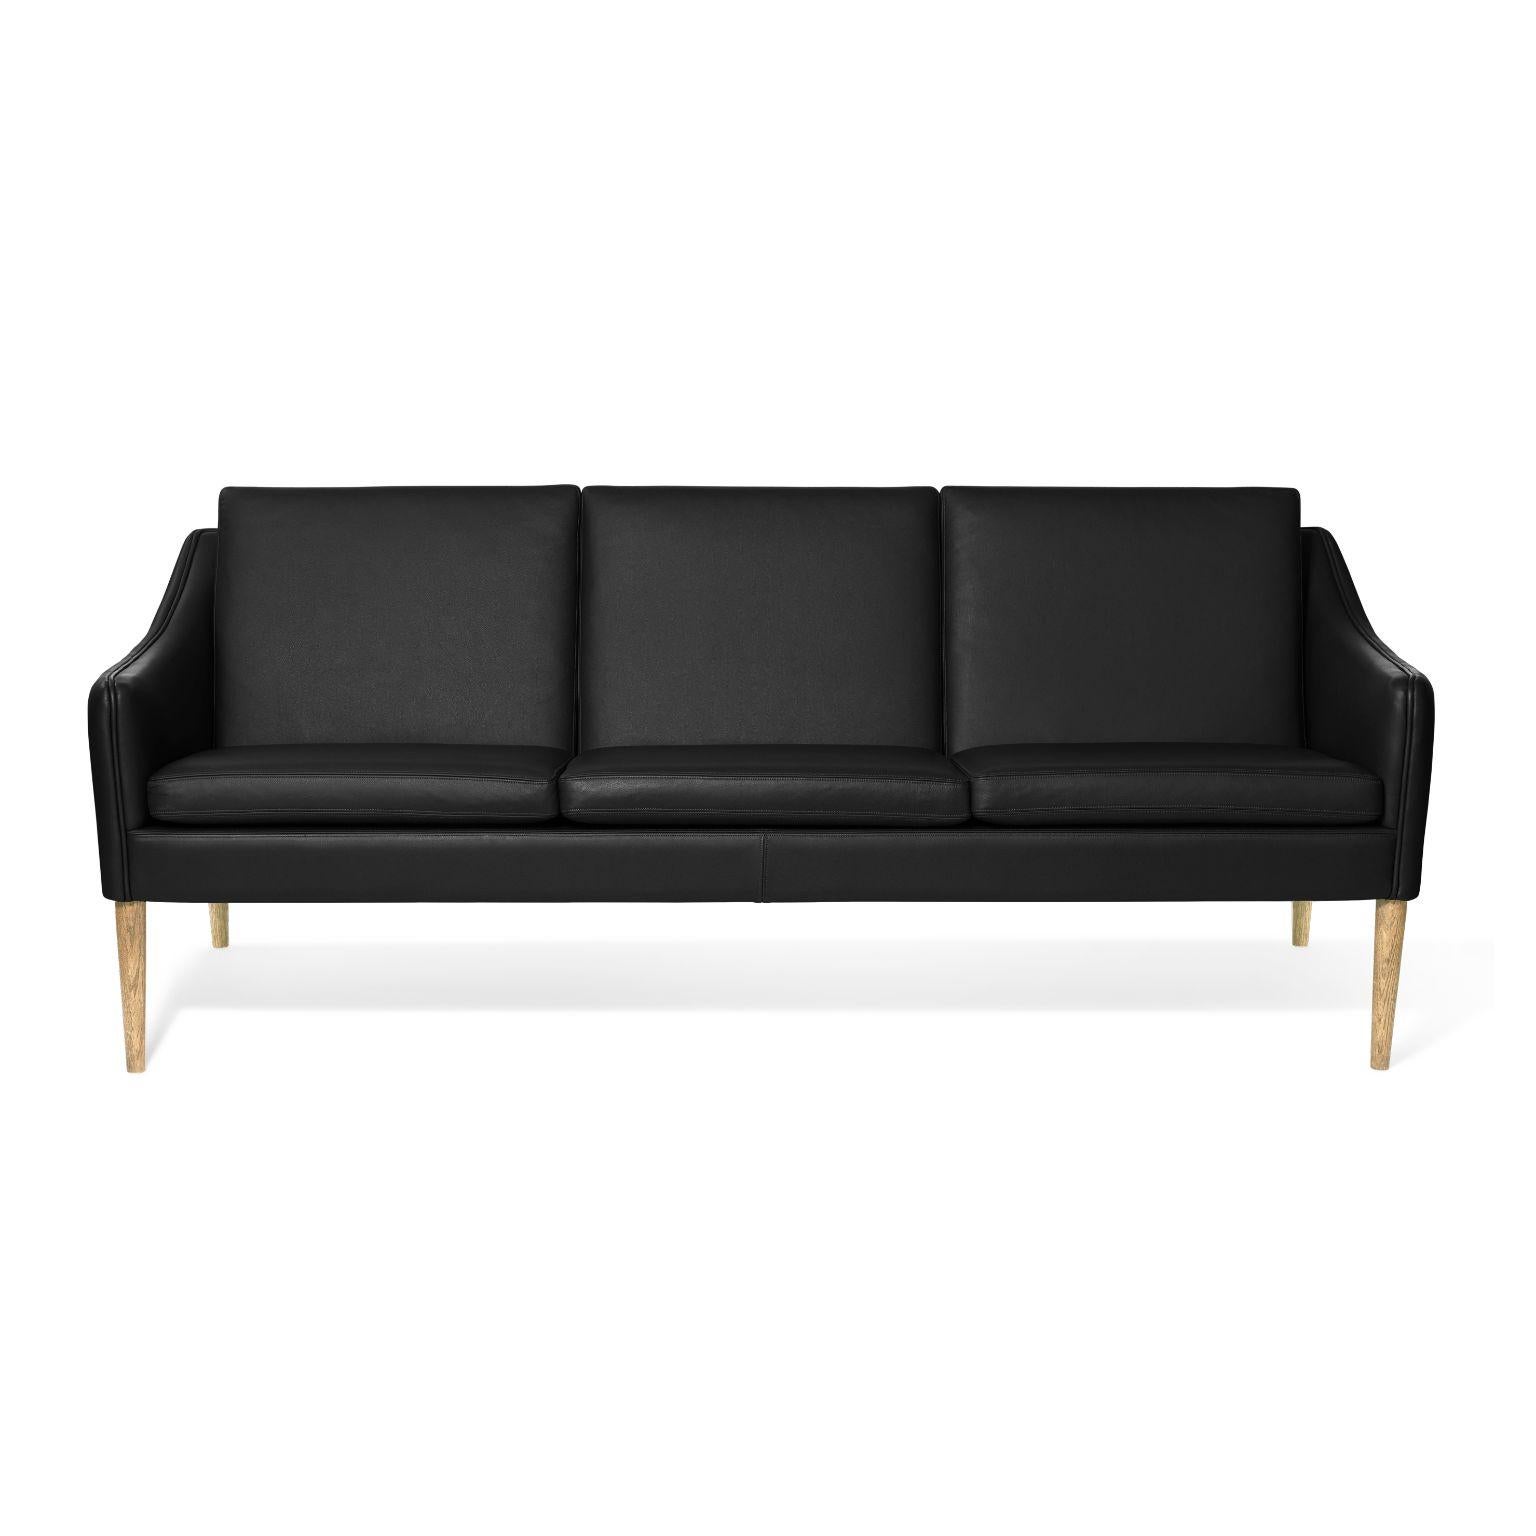 Mr Olsen 3 seater oak challenger black leather by Warm Nordic
Dimensions: D 201 x W 79 x H 78/46 cm
Material: Textile upholstery, Foam, Spring system, Solid oiled oak legs, Solid smoked oak legs, Leather
Weight: 50 kg
Also available in different